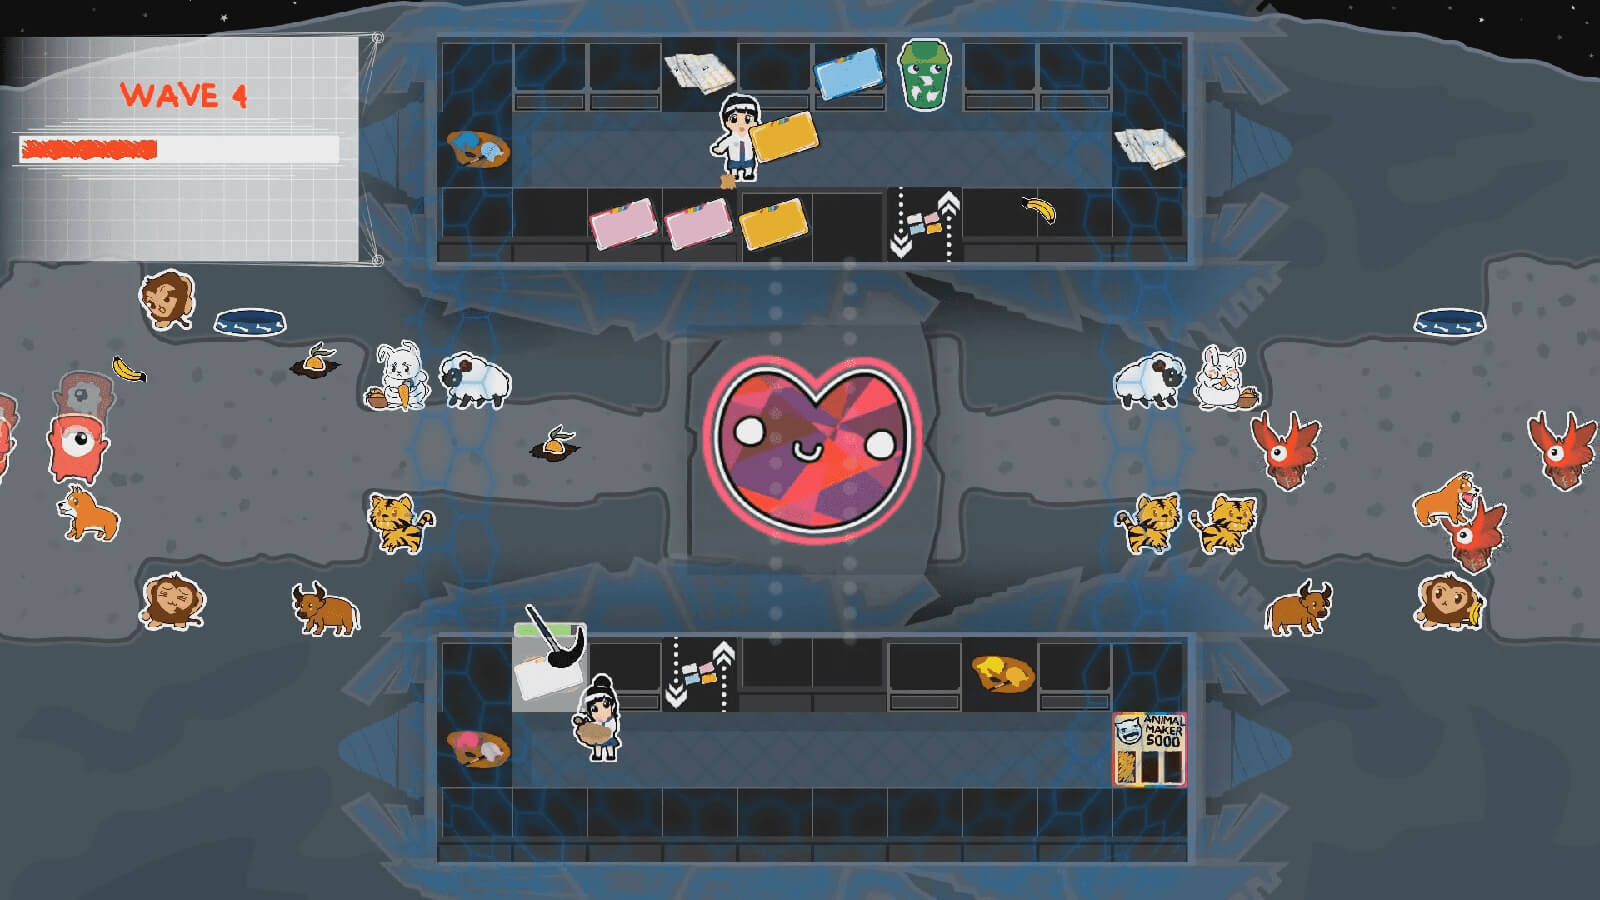 In a top-down underground game level, vibrant animal stickers protect a large, central heart shape from oncoming enemies.